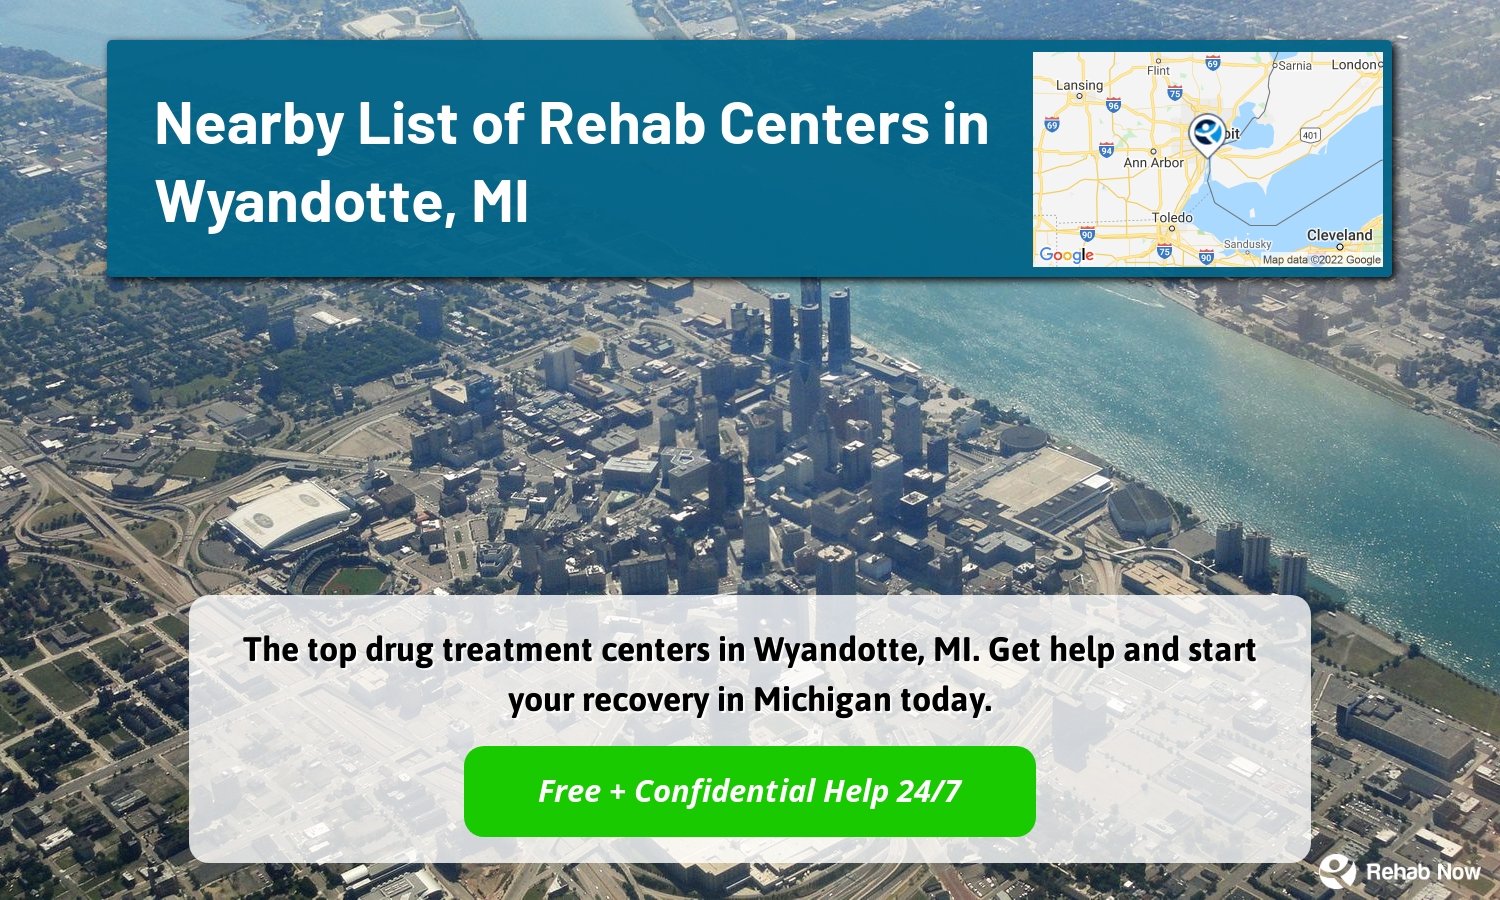 The top drug treatment centers in Wyandotte, MI. Get help and start your recovery in Michigan today.